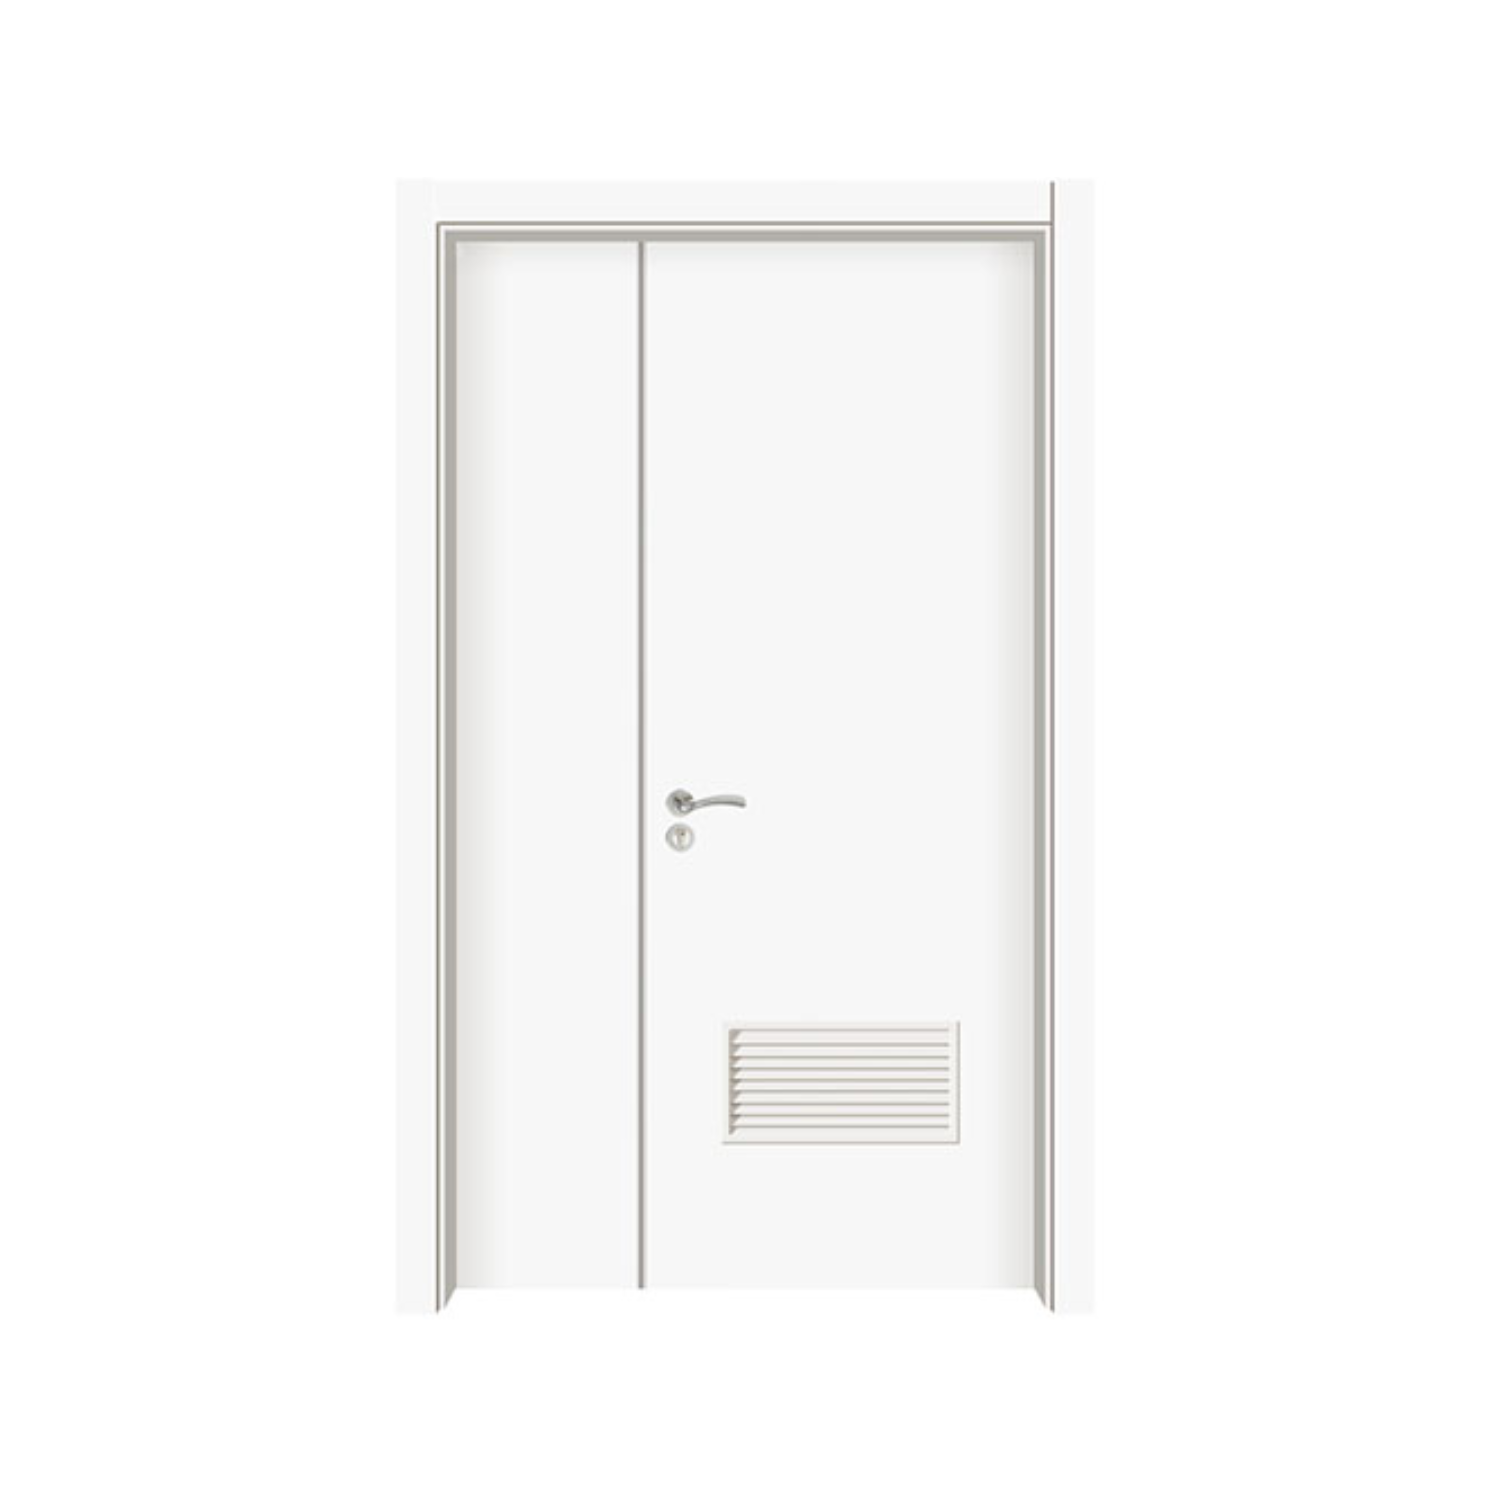 Fire Emergency Exit Fire Rated Steel Door With Glass And Emergency Lever Lock